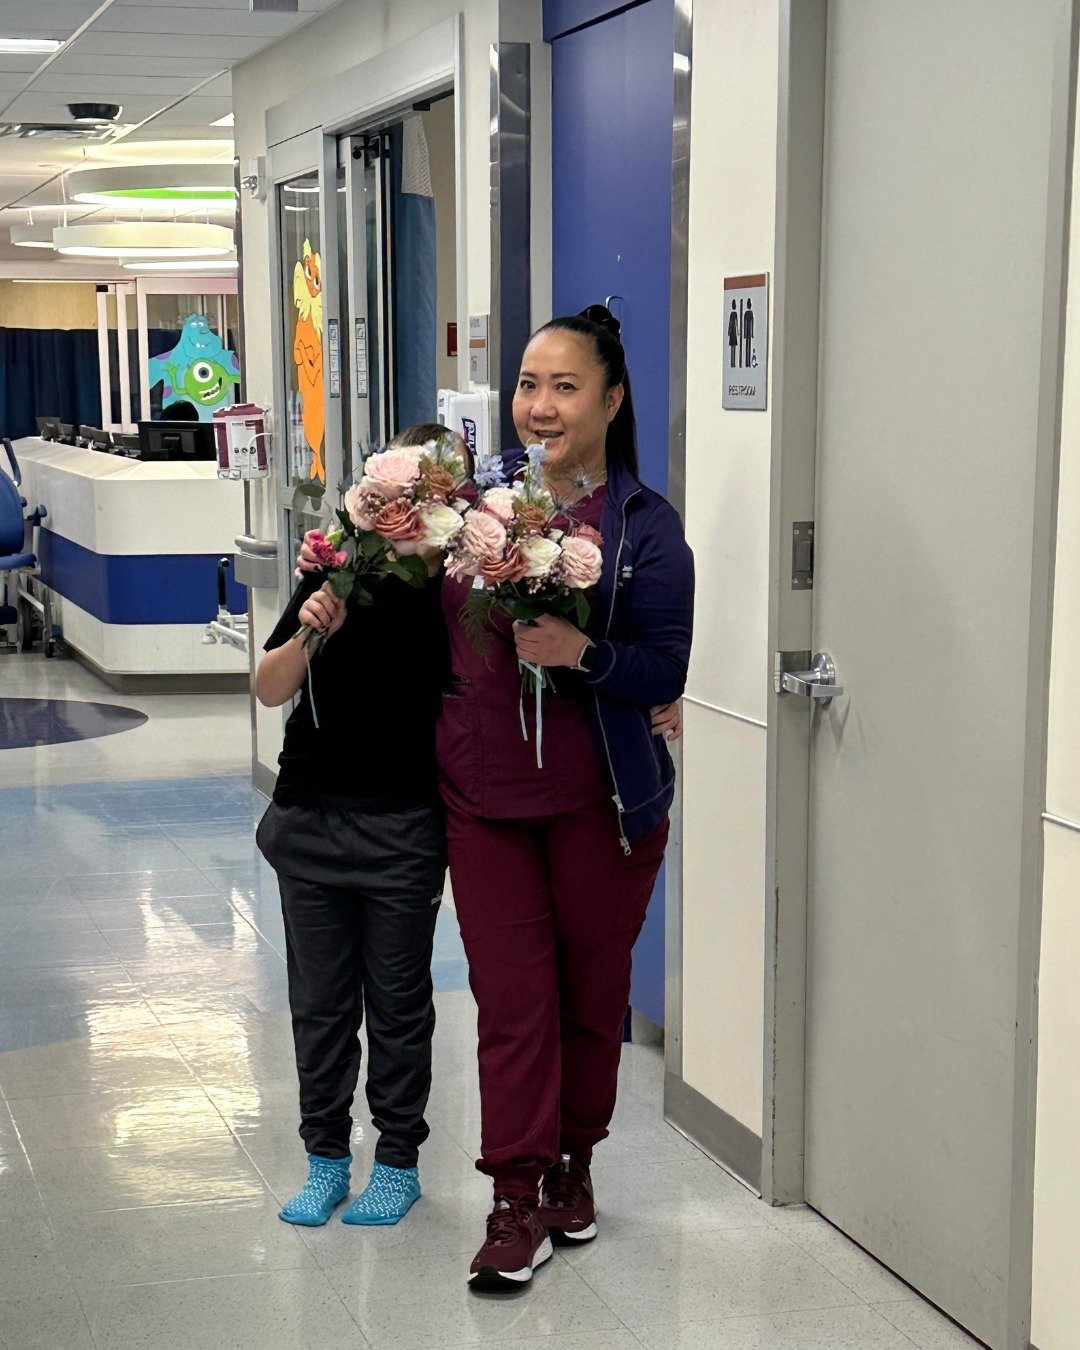 Guess what?! YOUR FLOWERS DONT ALWAYS END UP IN THE TRASH AFTER YOUR WEDDING.  If we can use them to bring a smile to someone&rsquo;s day and lift spirits, we do! Thank you to June Beri couple Alex and John. With their donated centerpieces we were ab